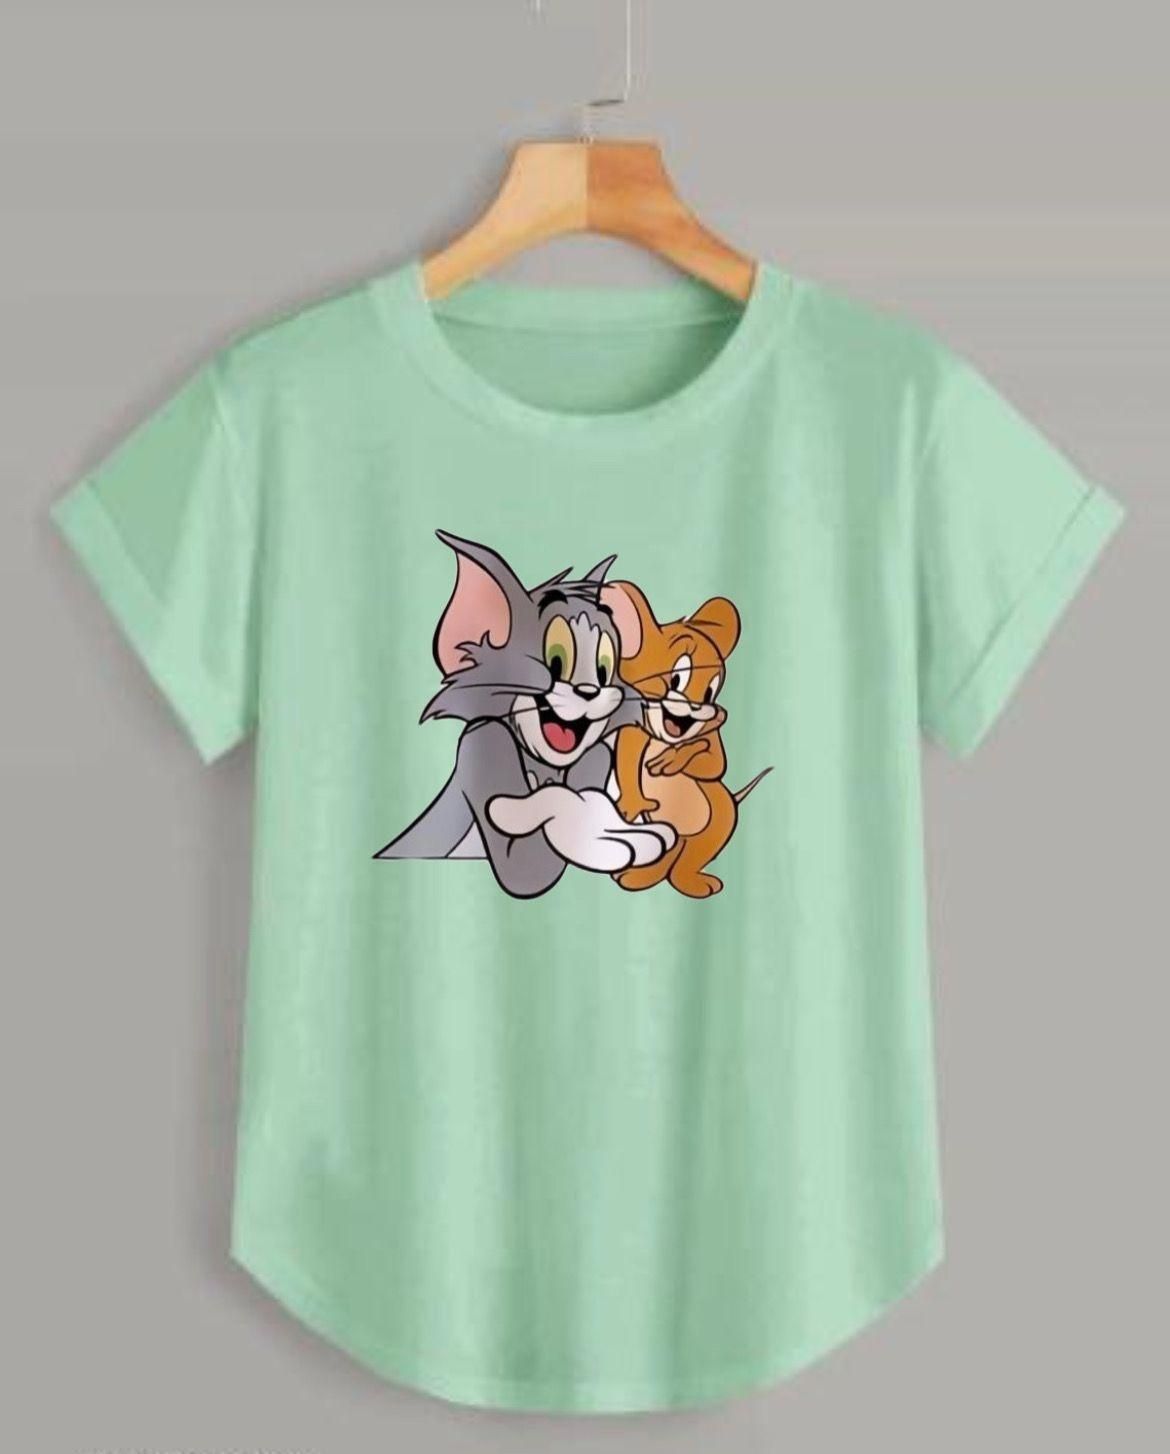 Minty Delight: Cotton Blend Graphic Print Women's T-Shirt with Tom & Jerry Design"